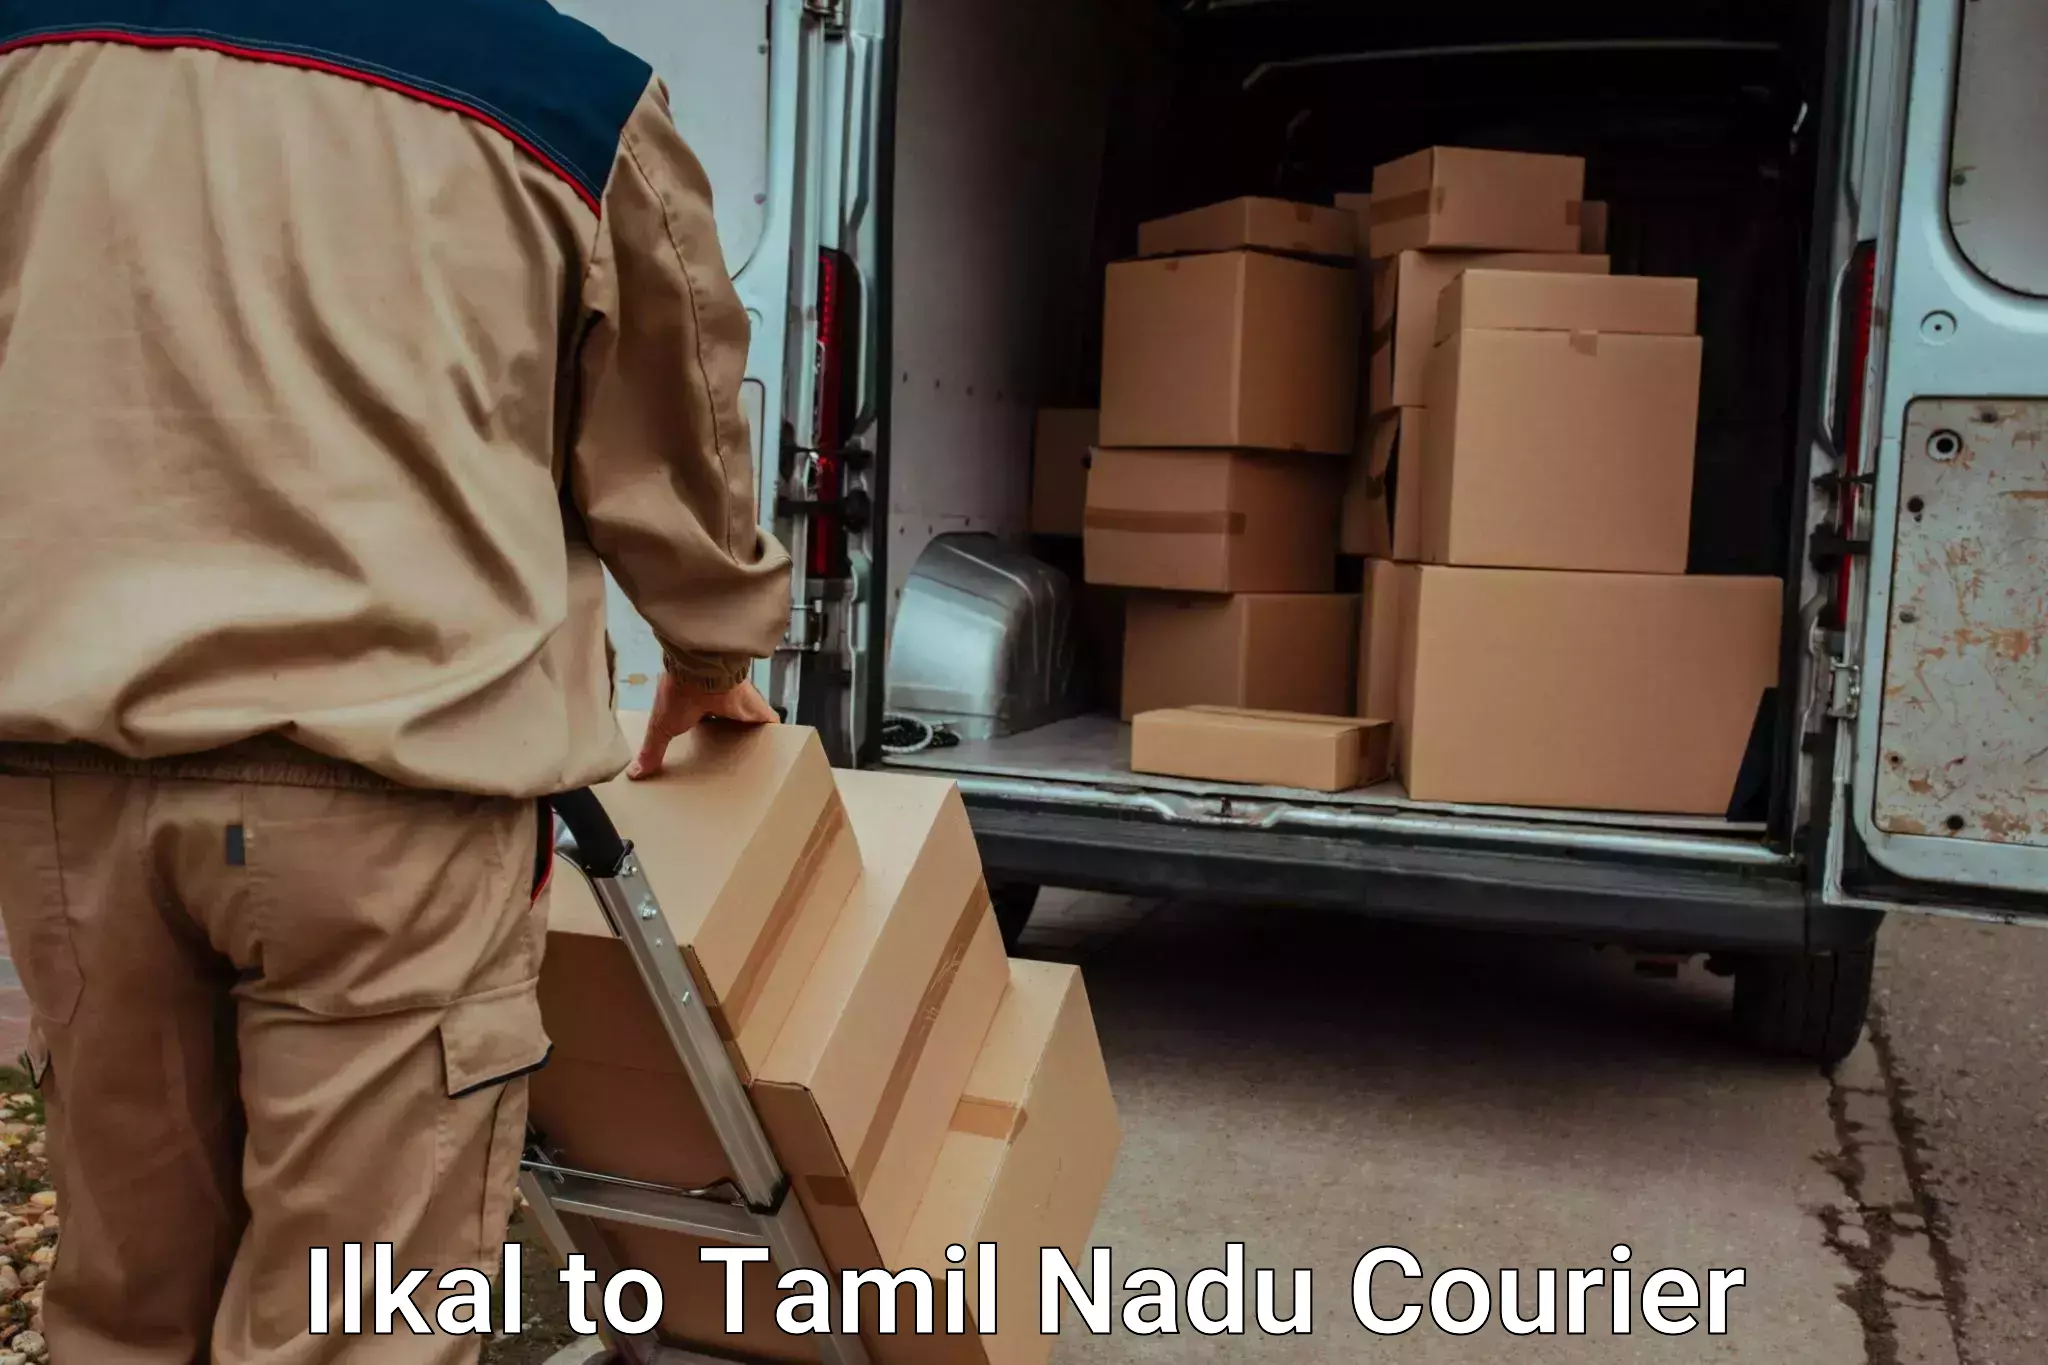 Instant baggage transport quote Ilkal to Thanjavur